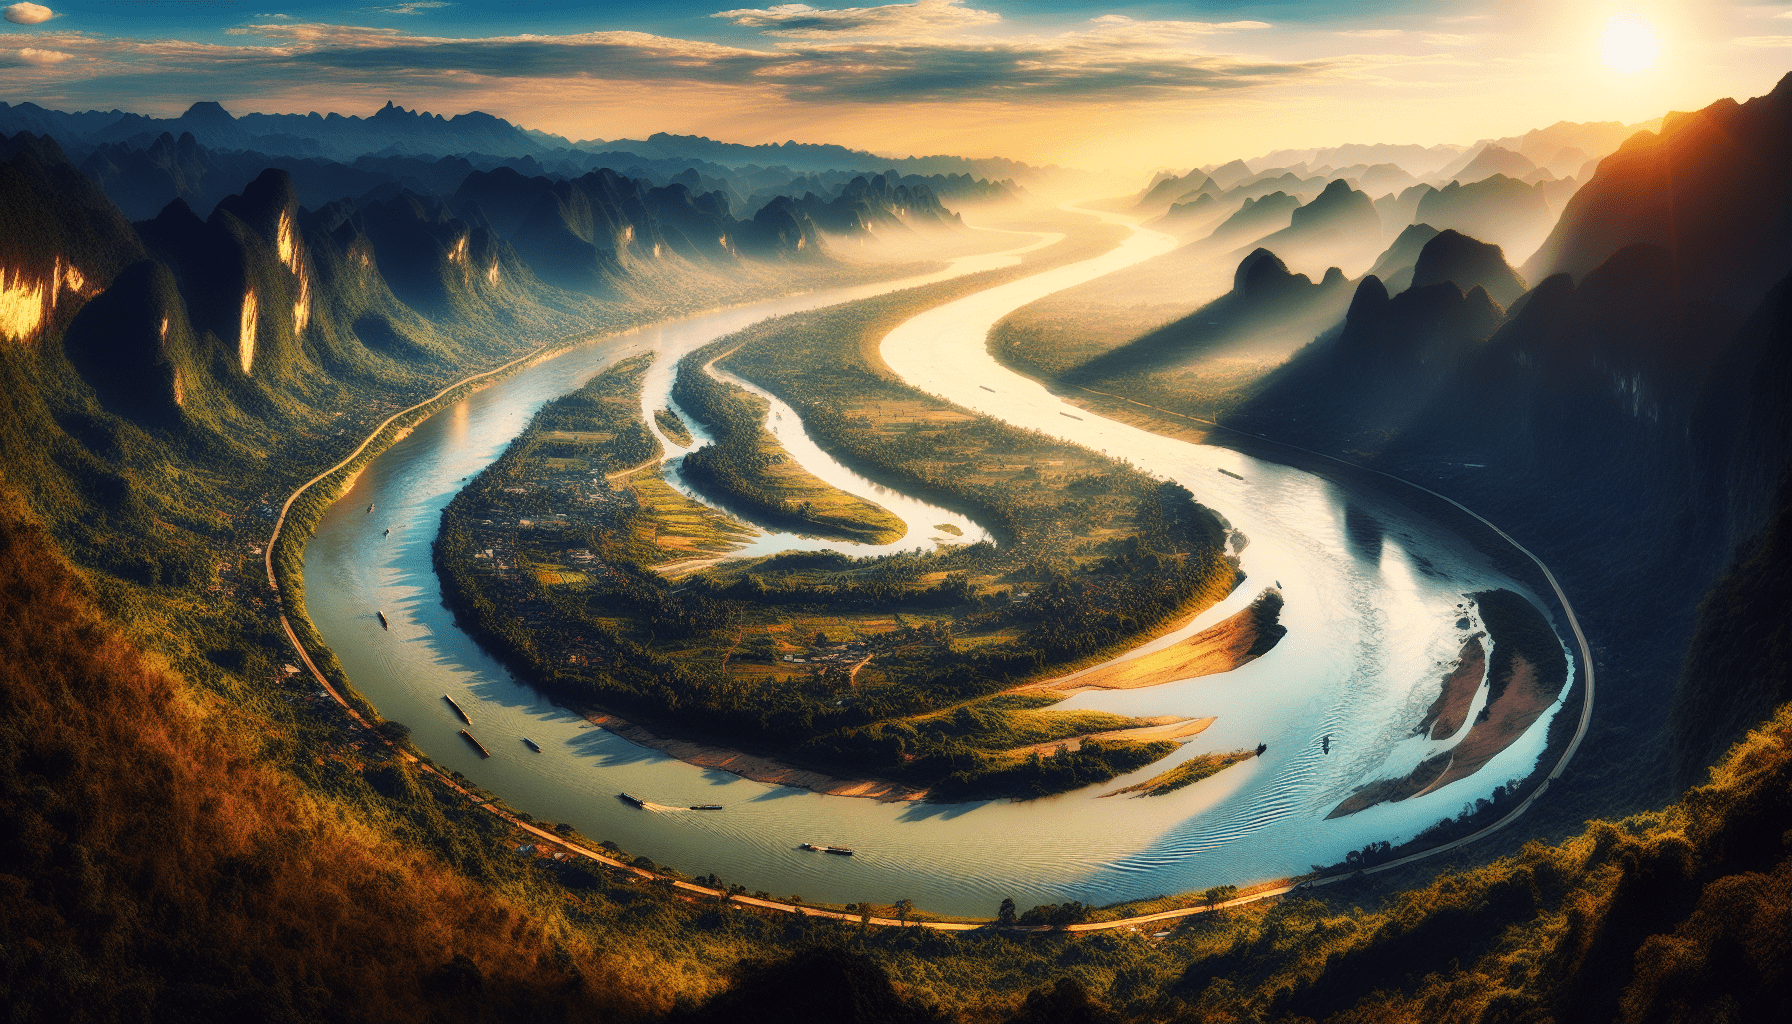 Who Is The Longest River Of Asia?